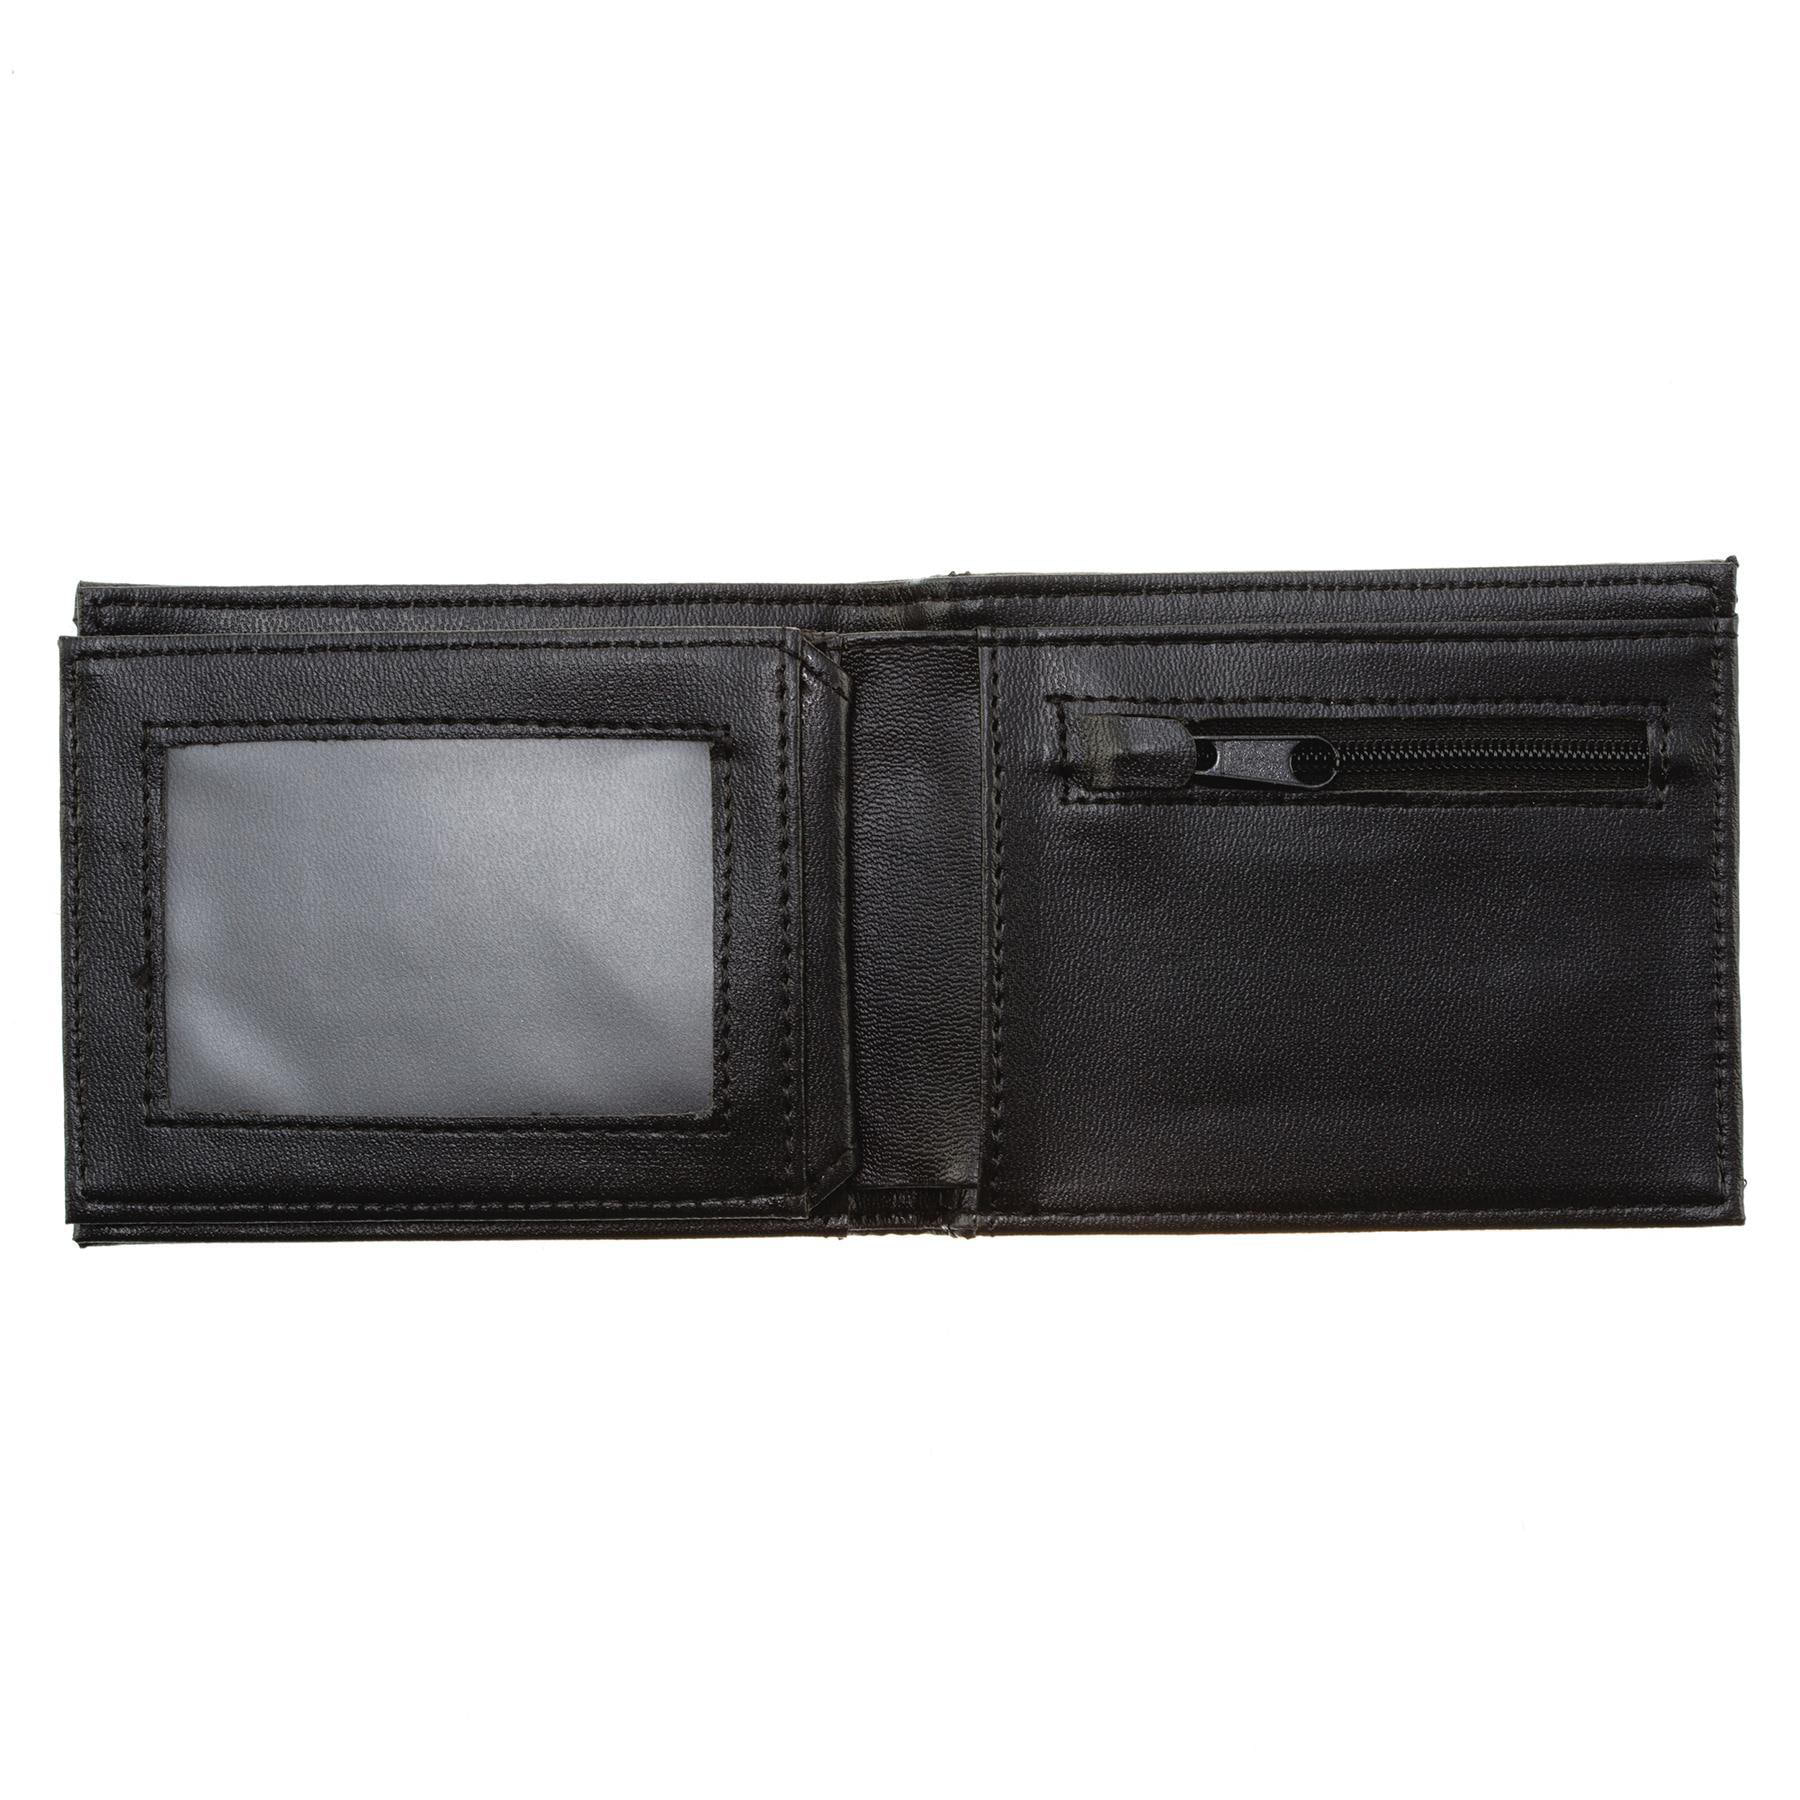 Lucid Silo Wallet In Brown/black - Fast Shipping & Easy Returns - City ...